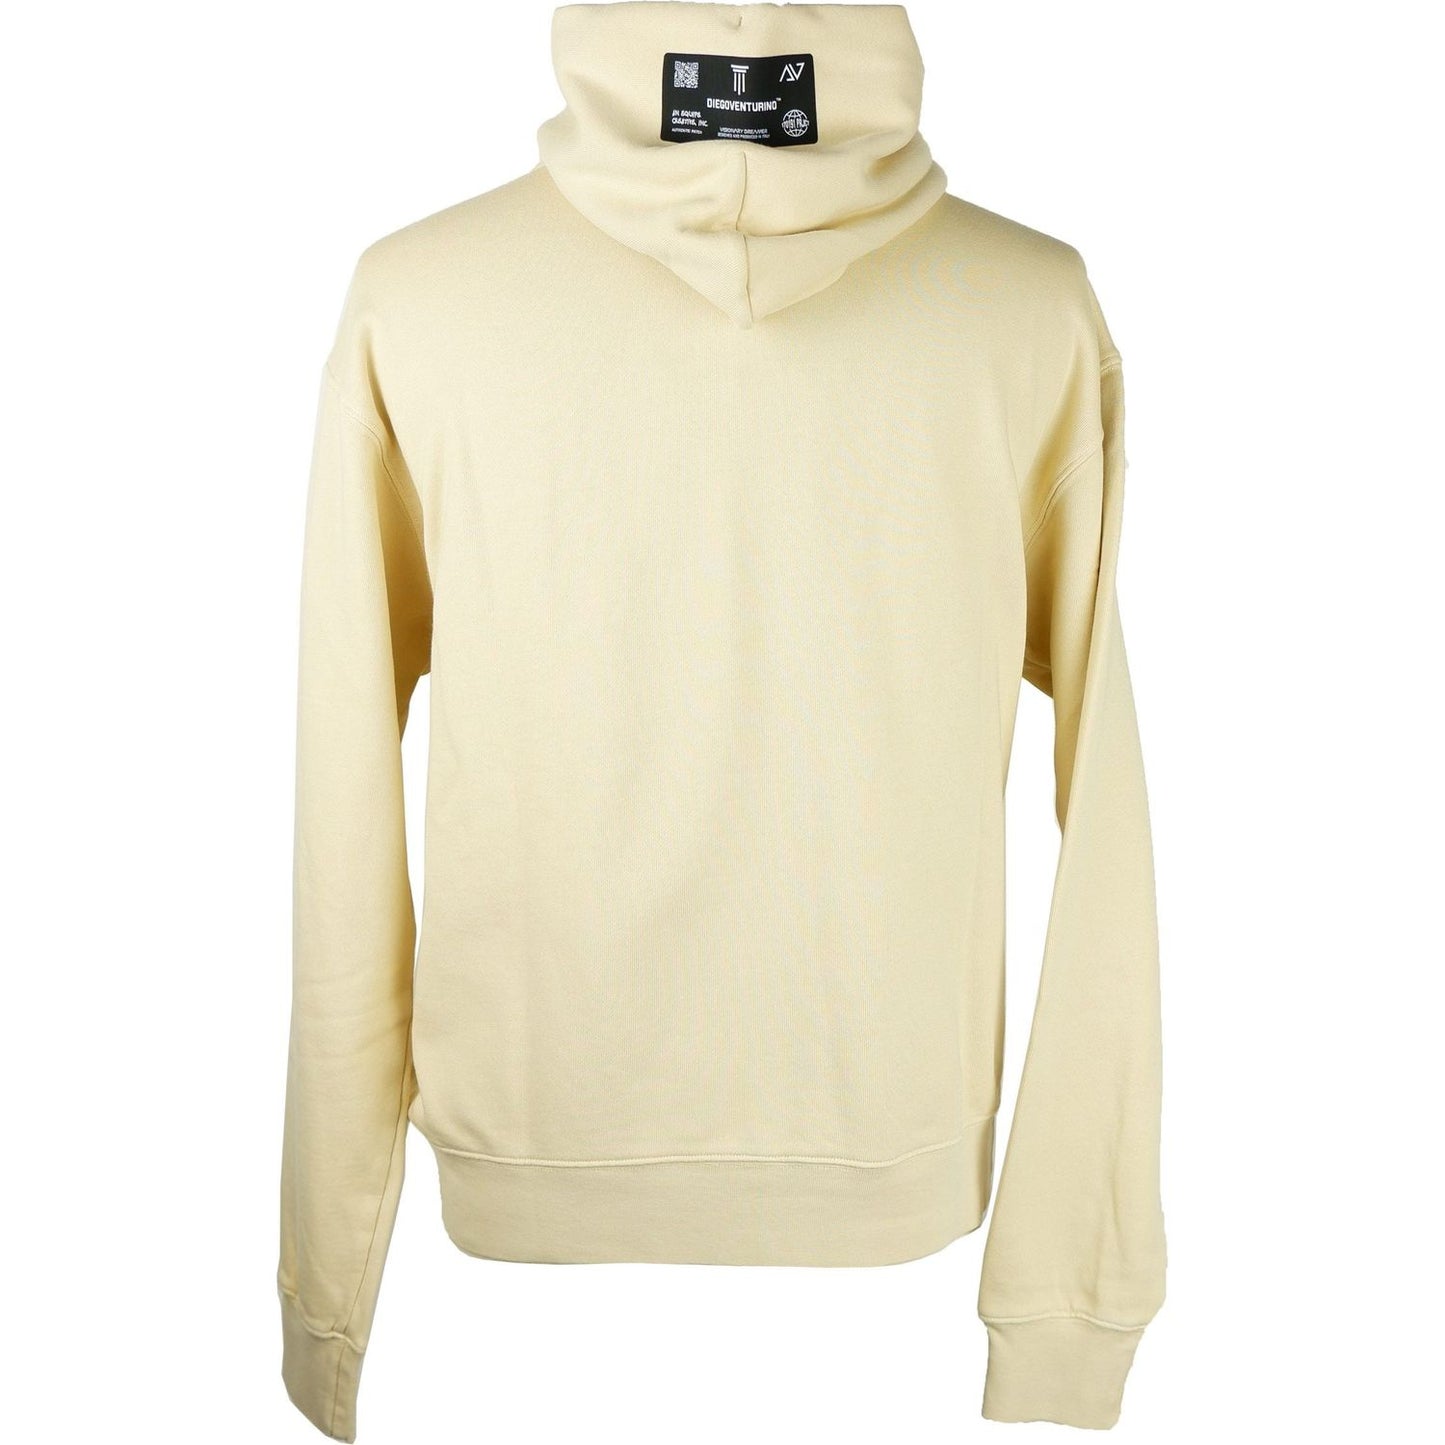 Diego Venturino Classic Beige Hoodie With Signature Design dndvflhnpp-sand-diego-venturino-sweater MAN TOPS AND SHIRTS product-6827-225739365-scaled-c754ba02-e17.jpg